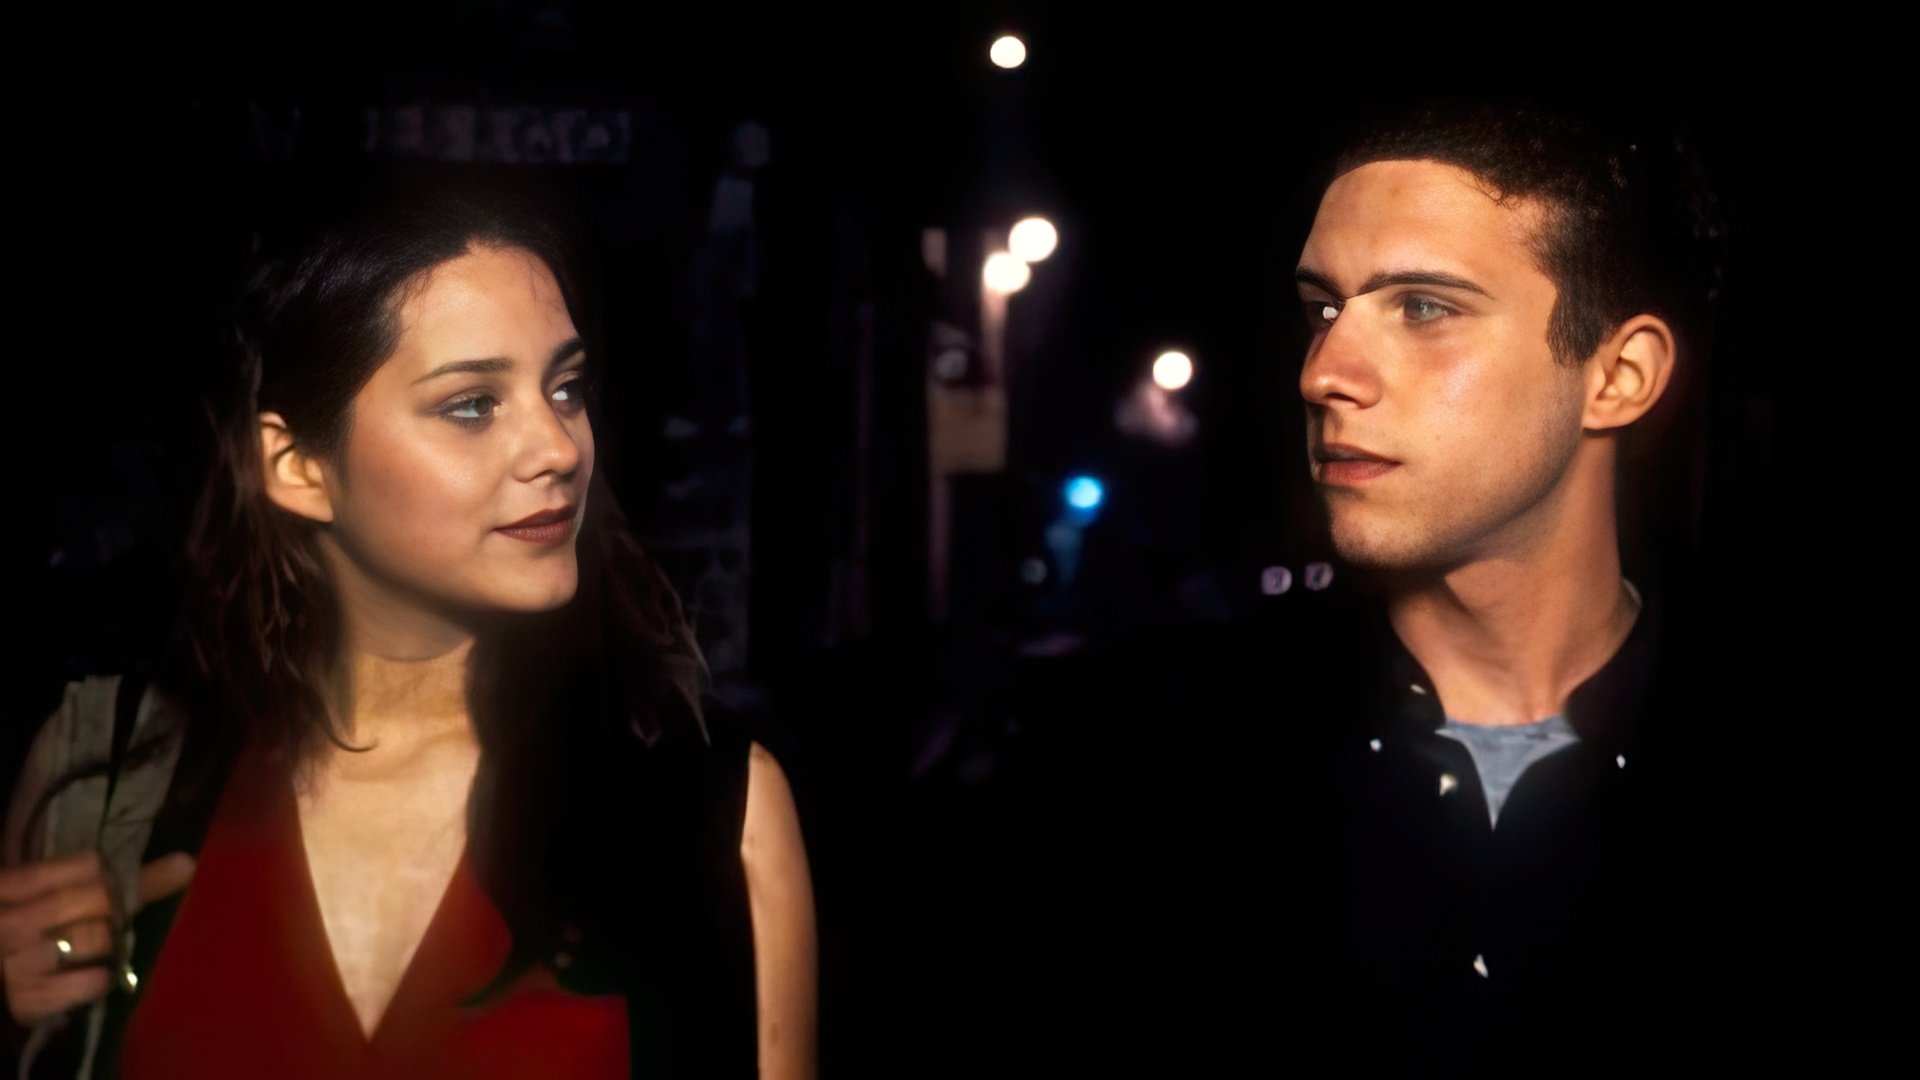 Marion Cotillard’s first feature-length movie role(1994)